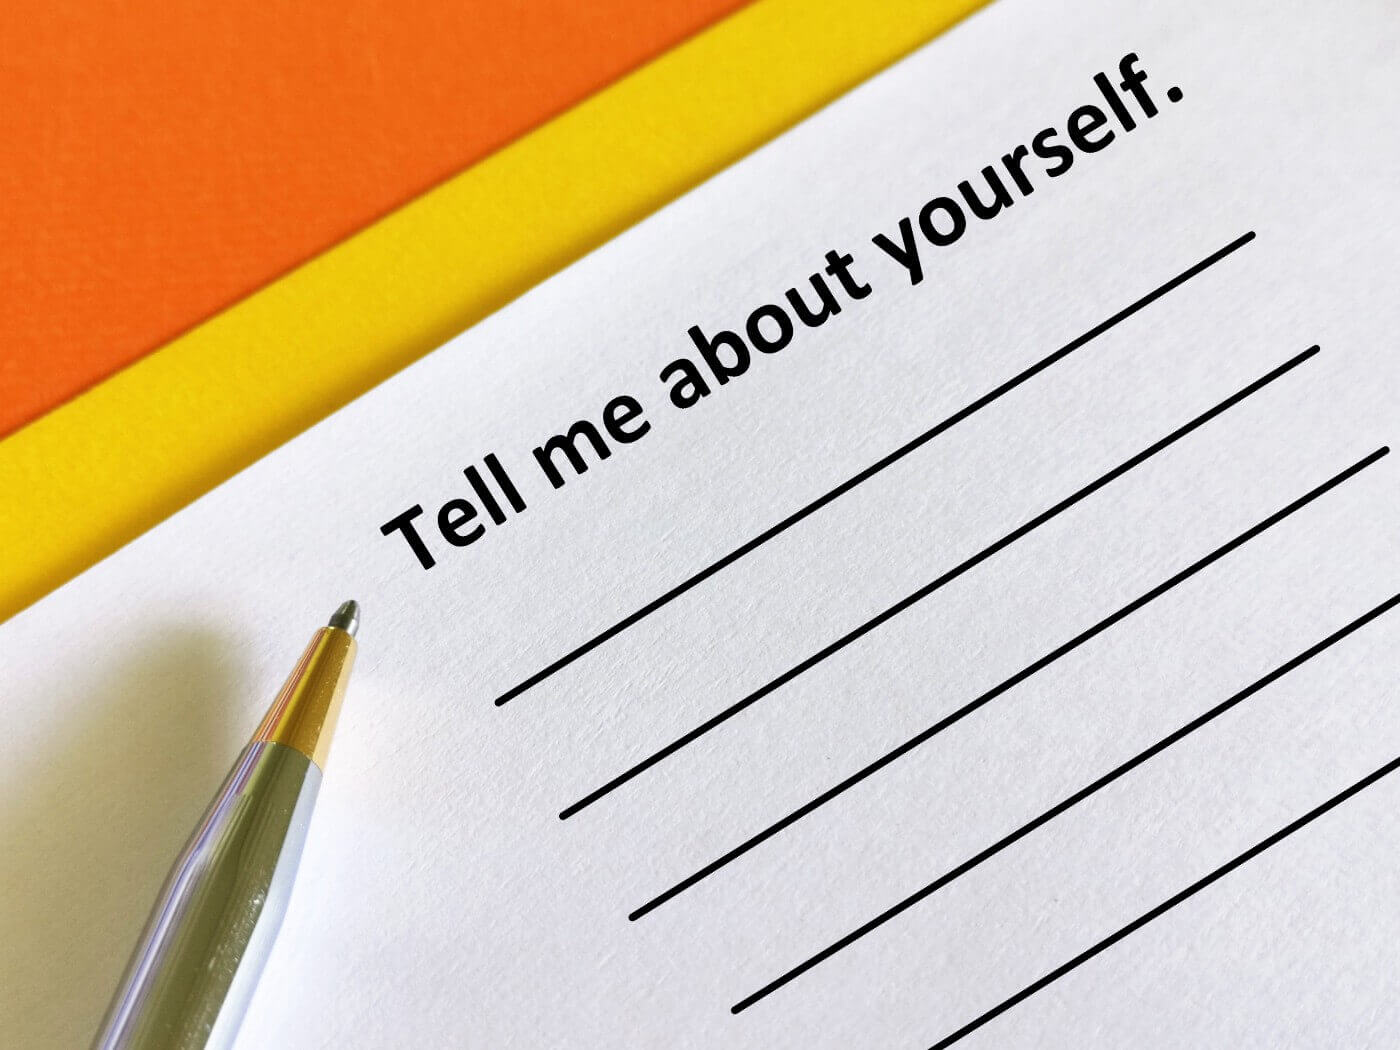 Piece of paper that says “tell me about yourself” and pen